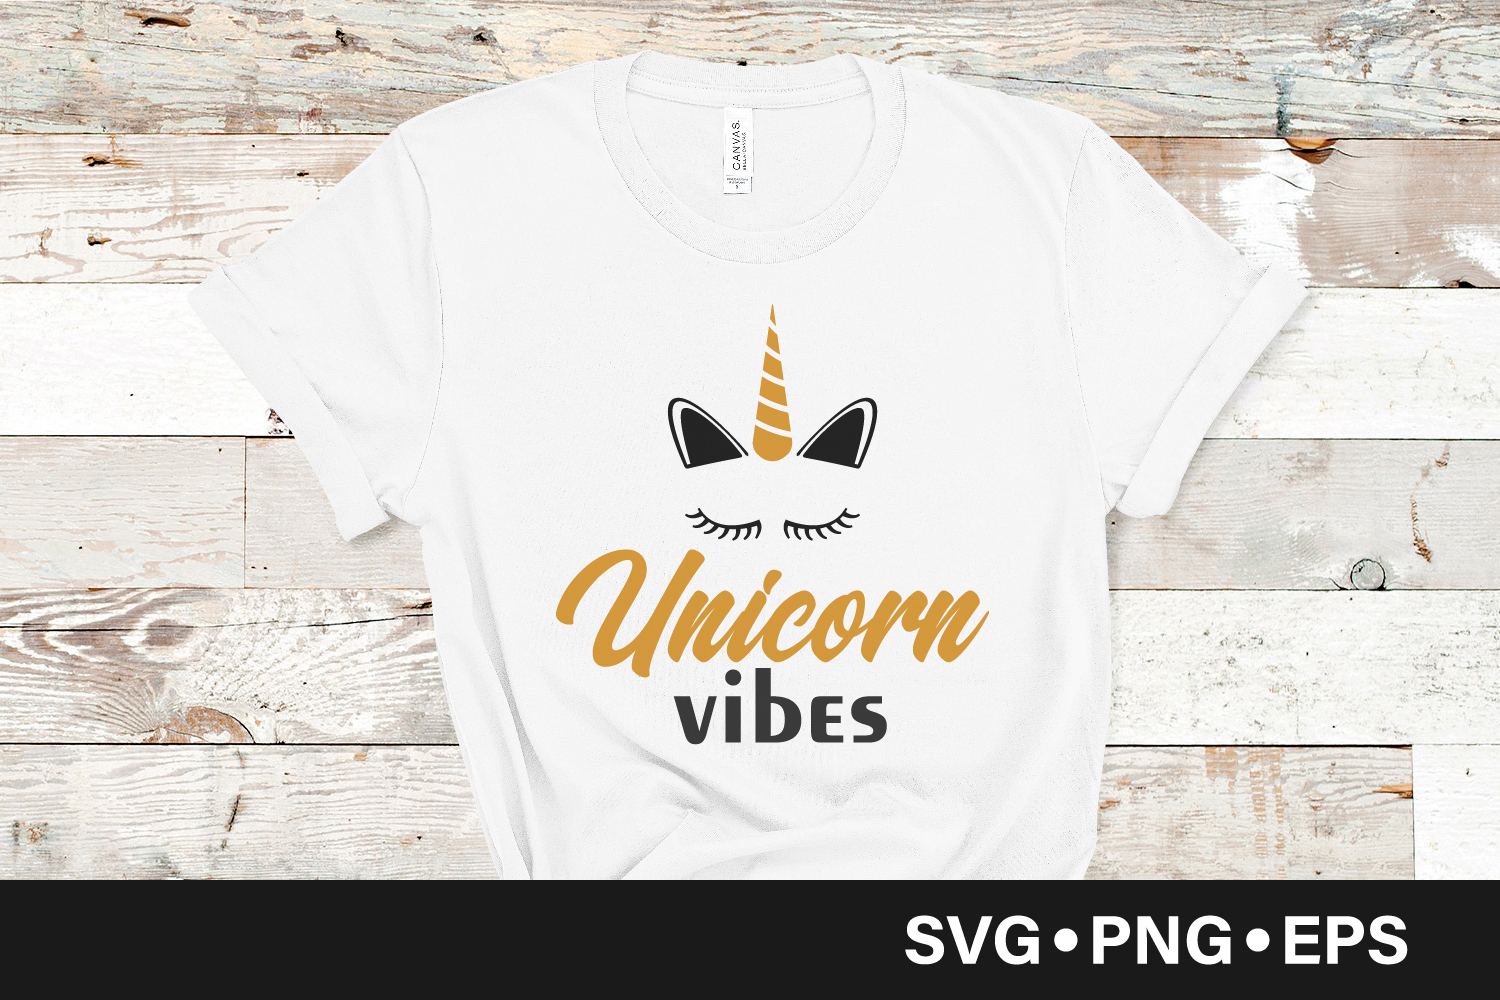 Download Unicorn vibes quote svg